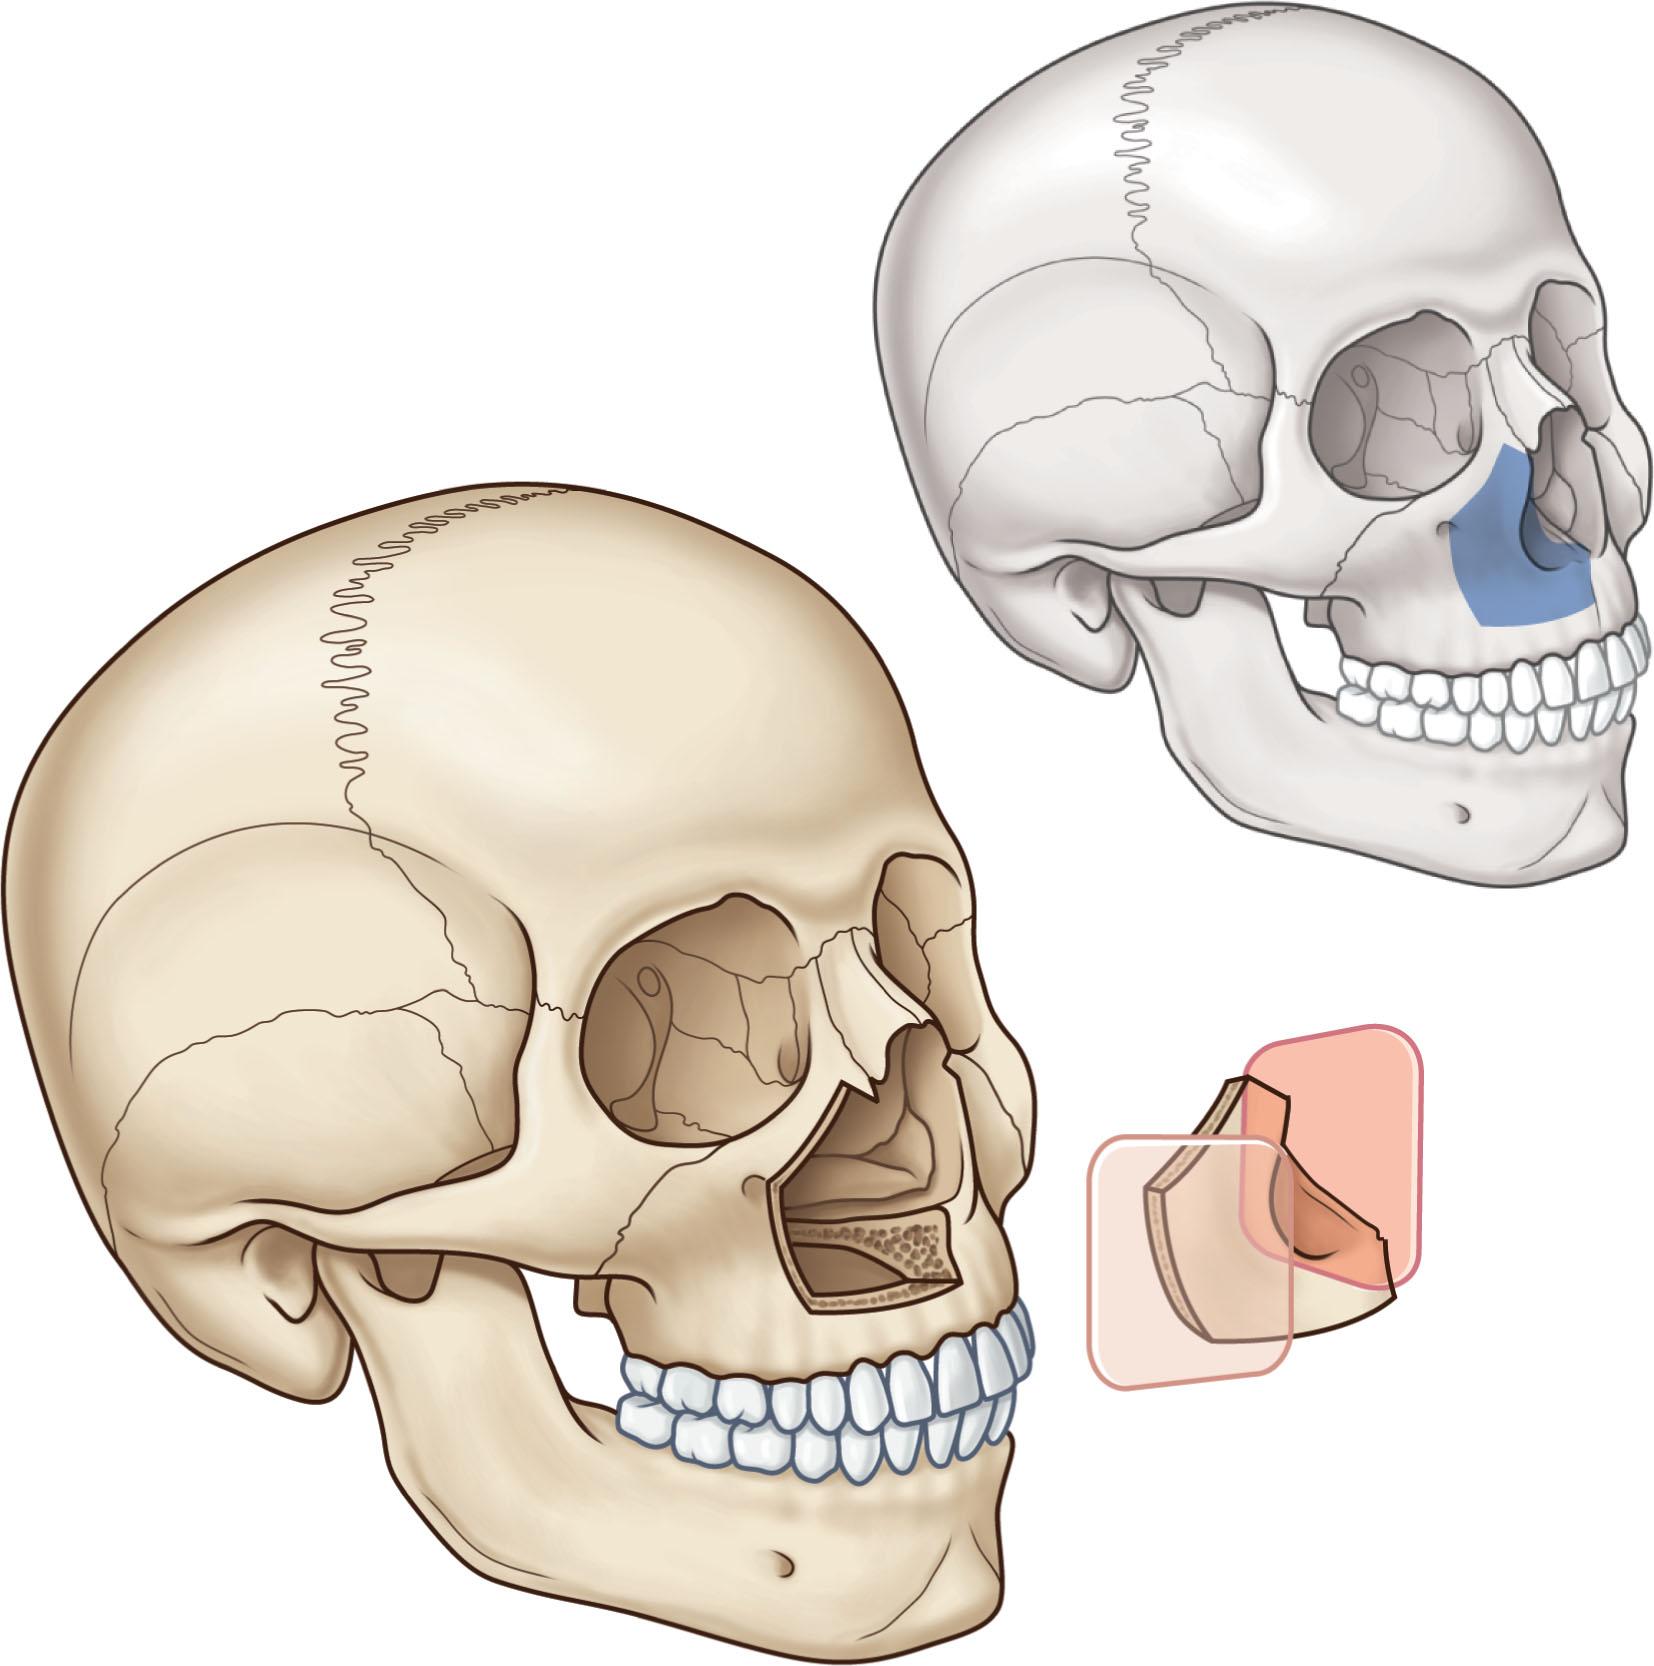 Figure 9.2, Type I, or partial, maxillectomy defects are those that involve one or two walls of the maxilla, most commonly the anterior and medial walls.